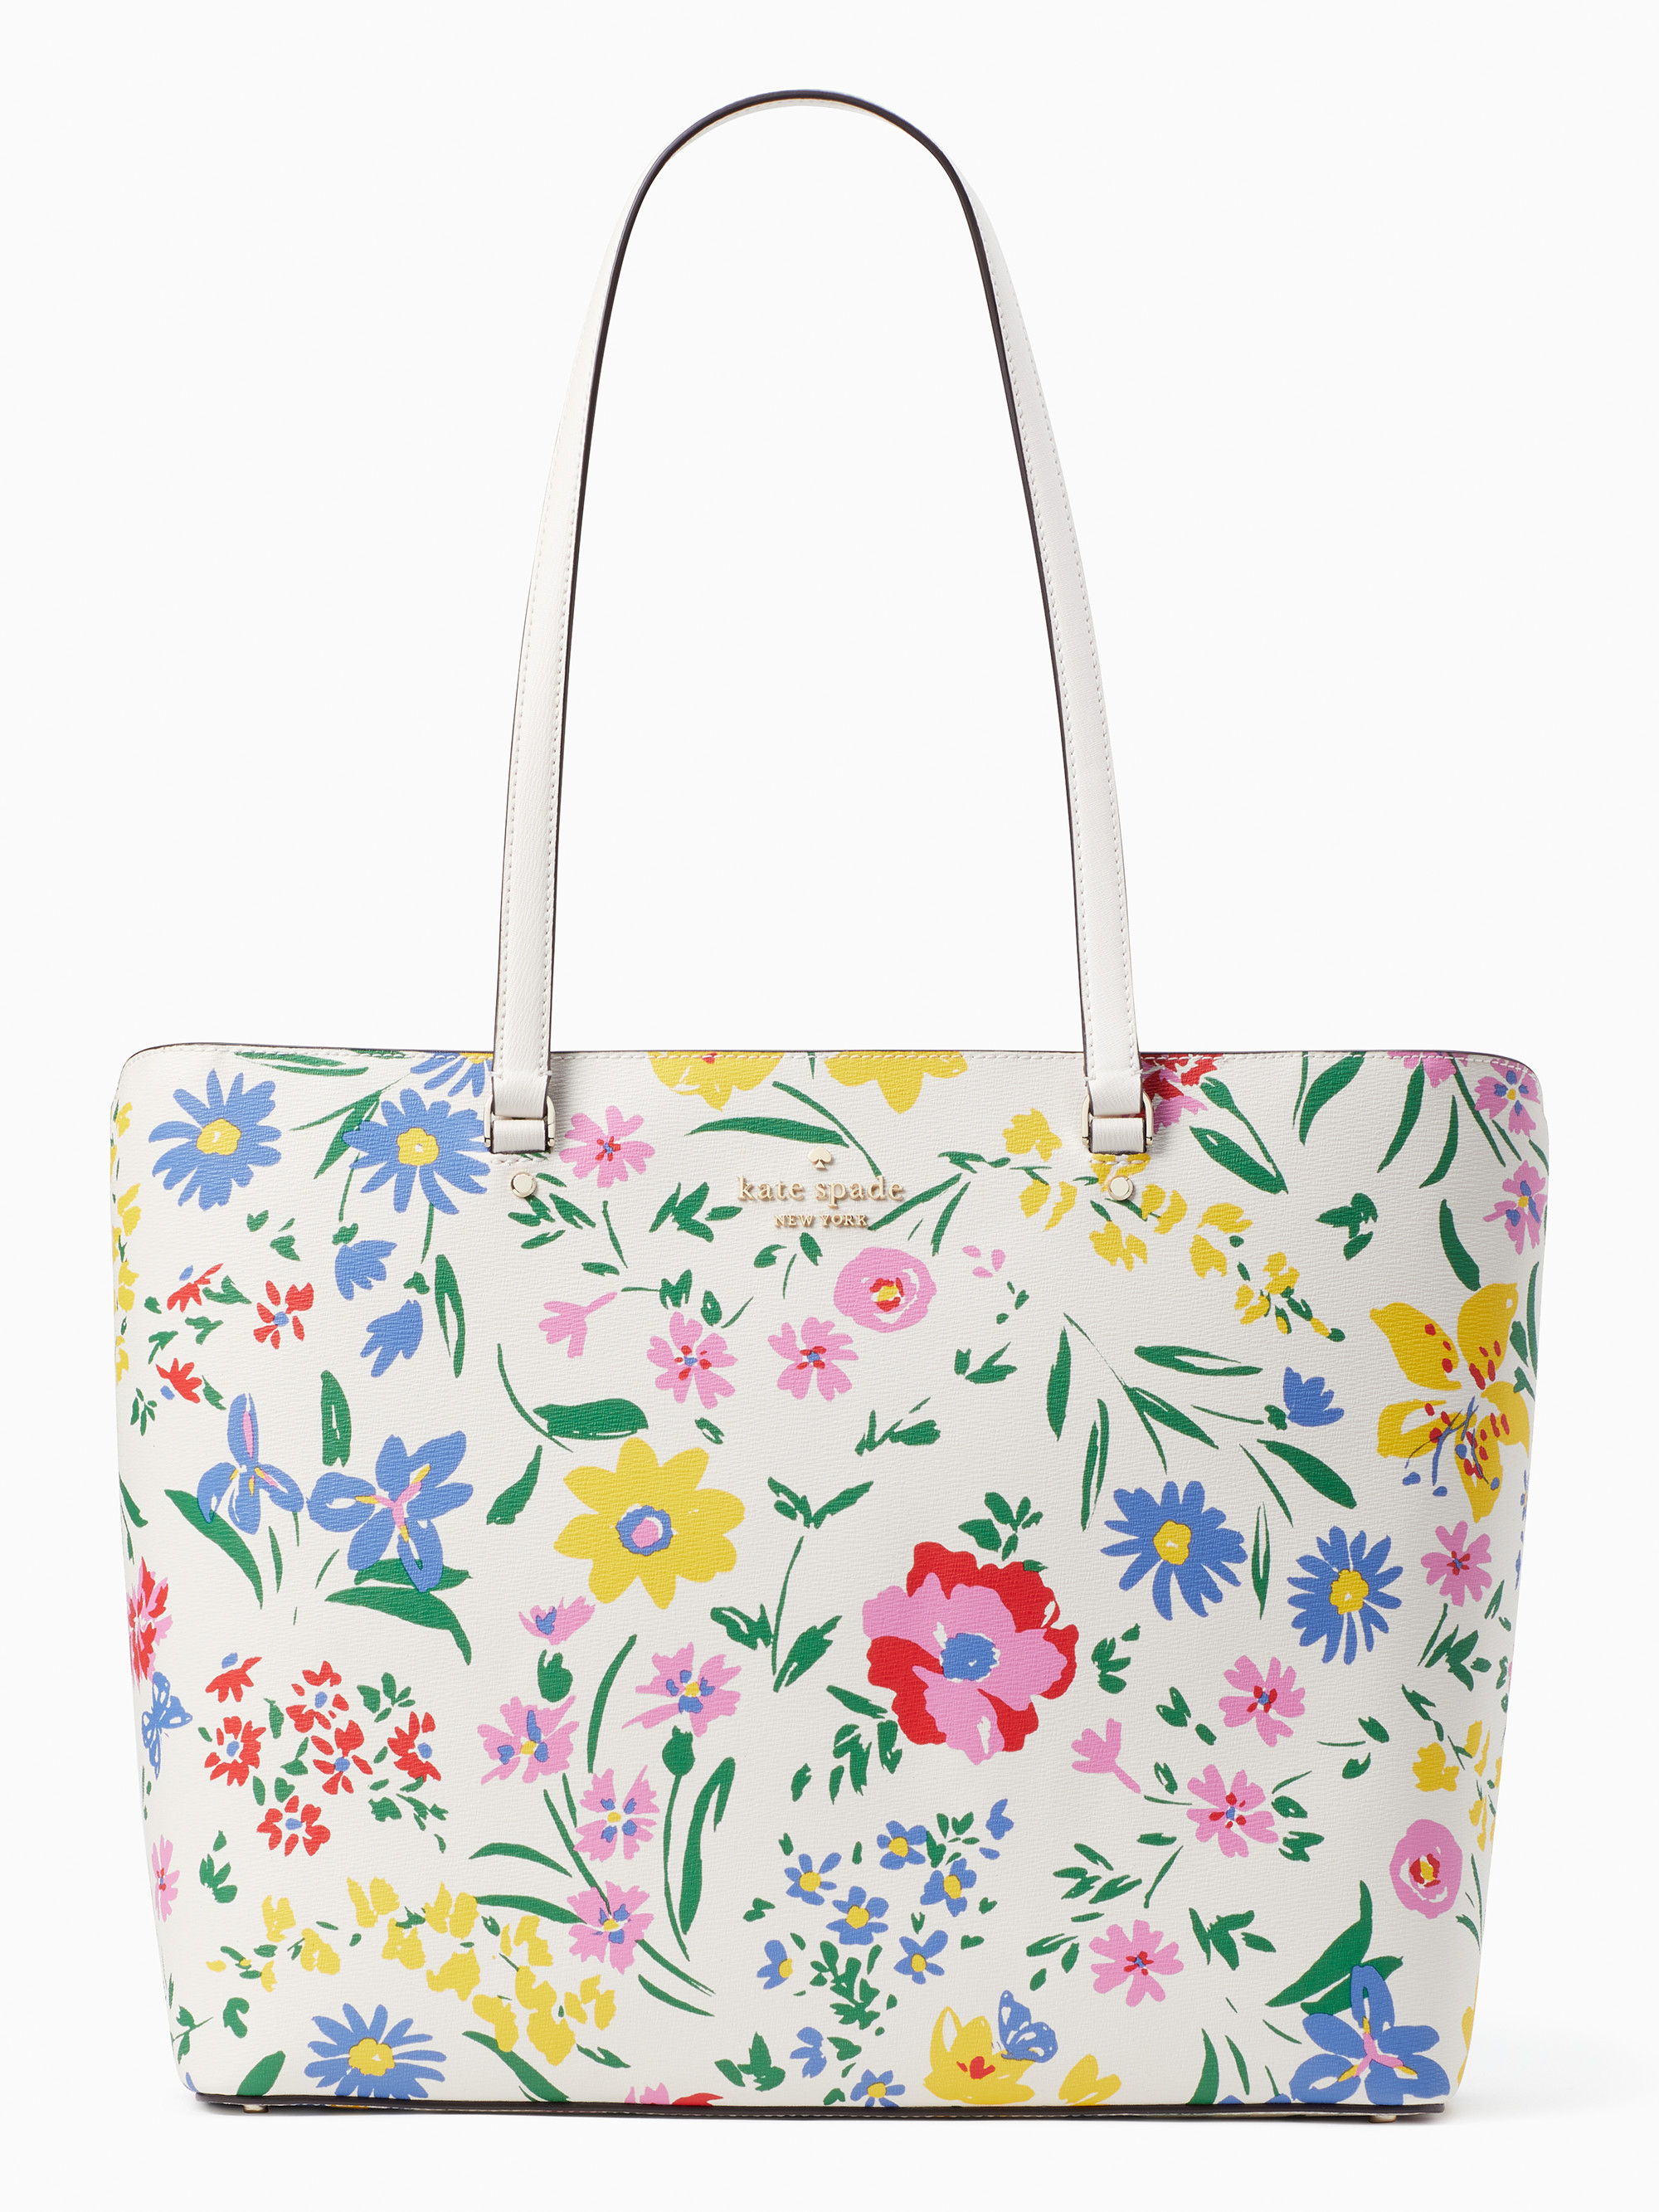 Kate Spade Perfect New England Floral Tote Bag, Groß